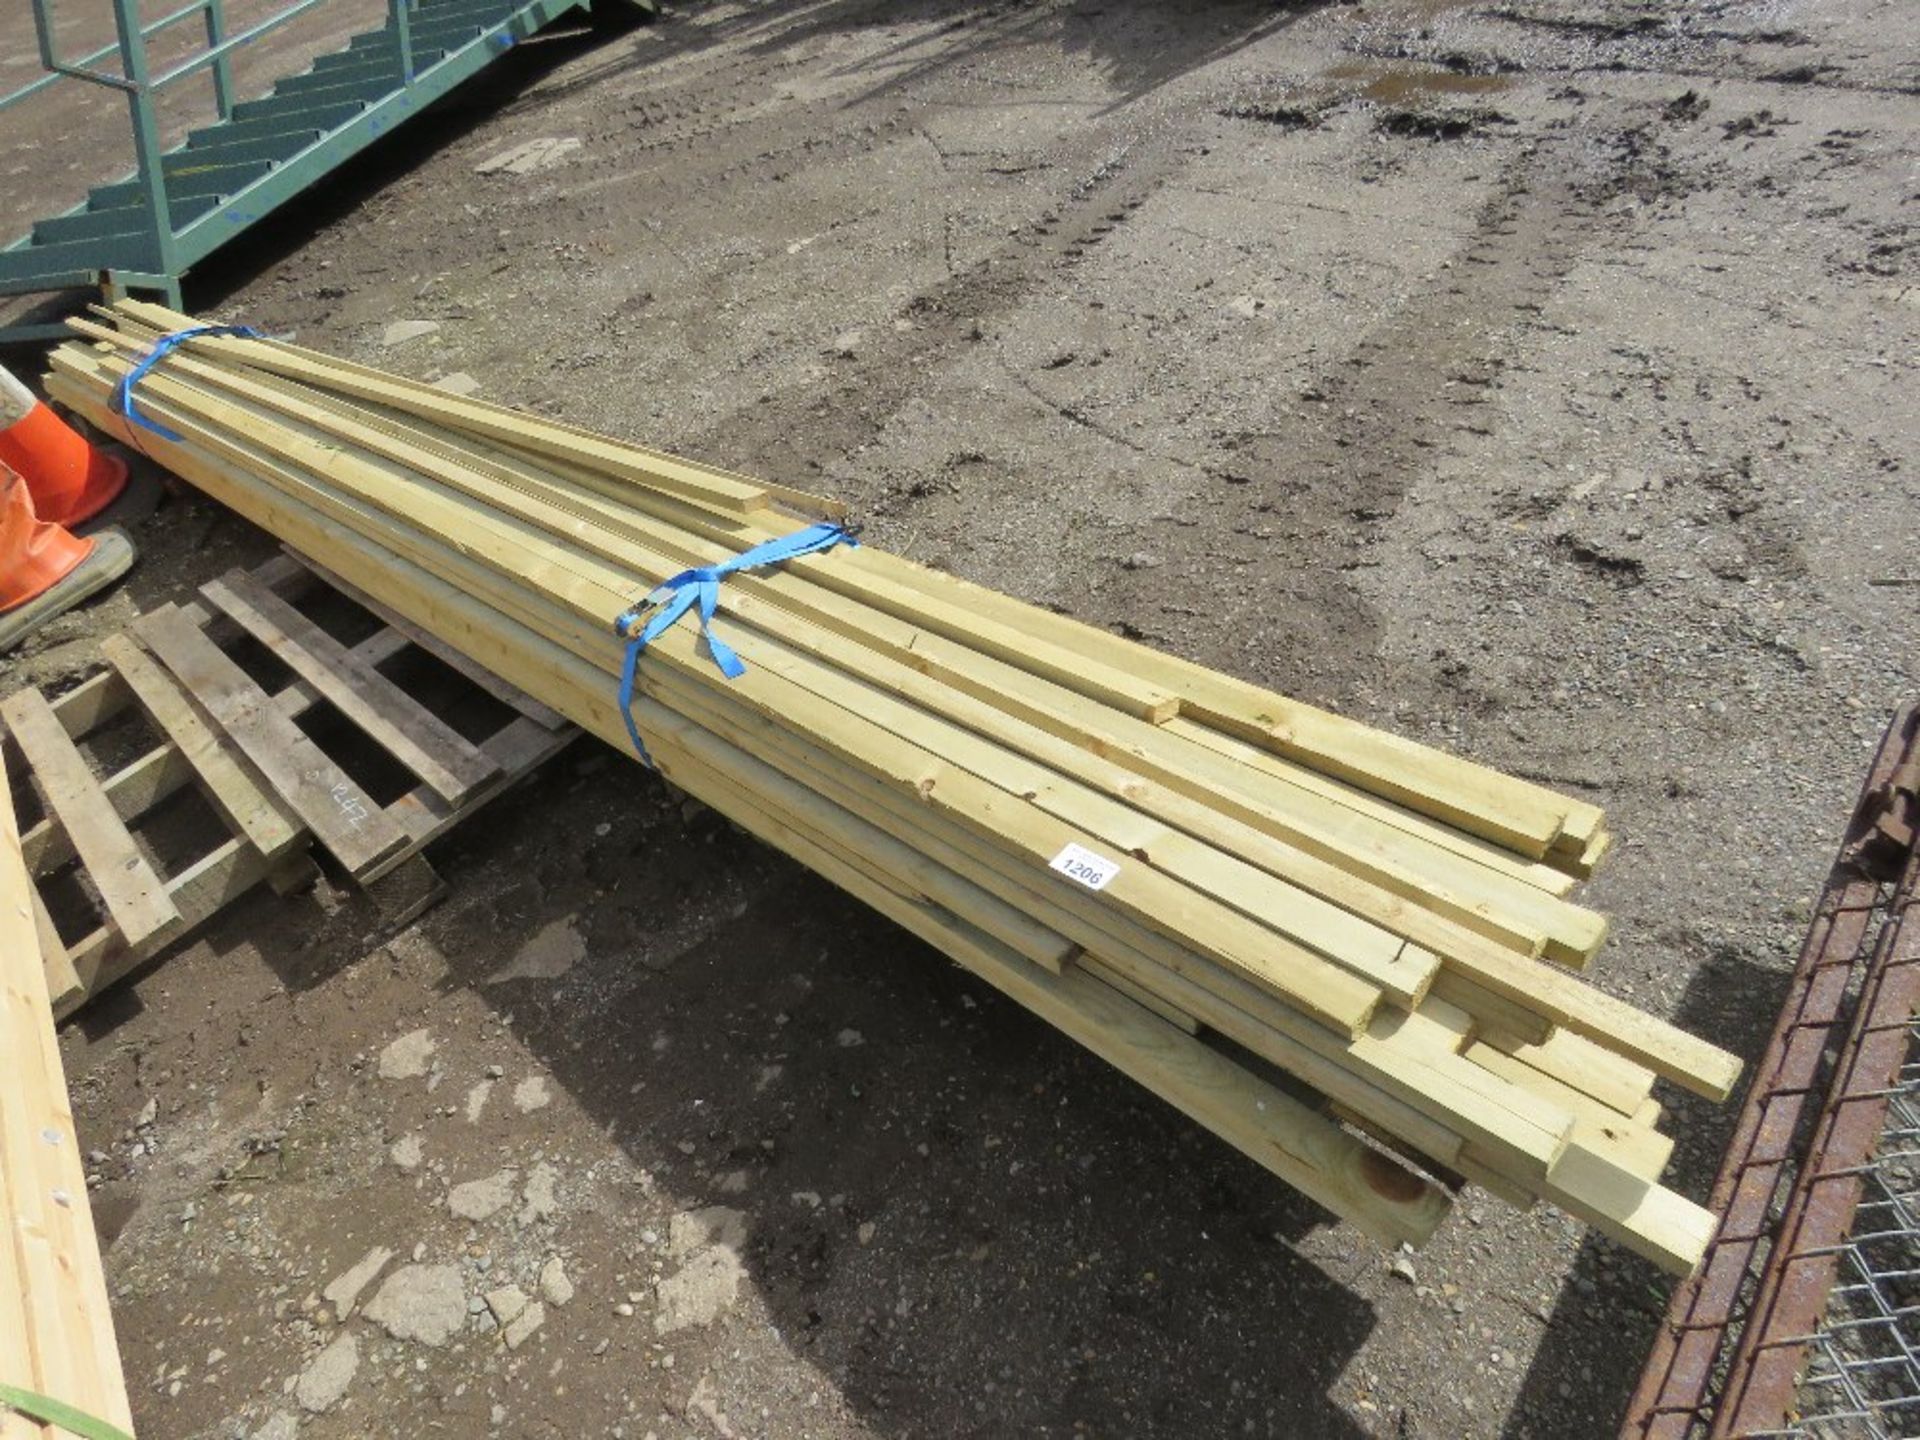 QUANTITY OF TILERS TYPE BATTENS ETC 9-15FT LENGTH APPROX.